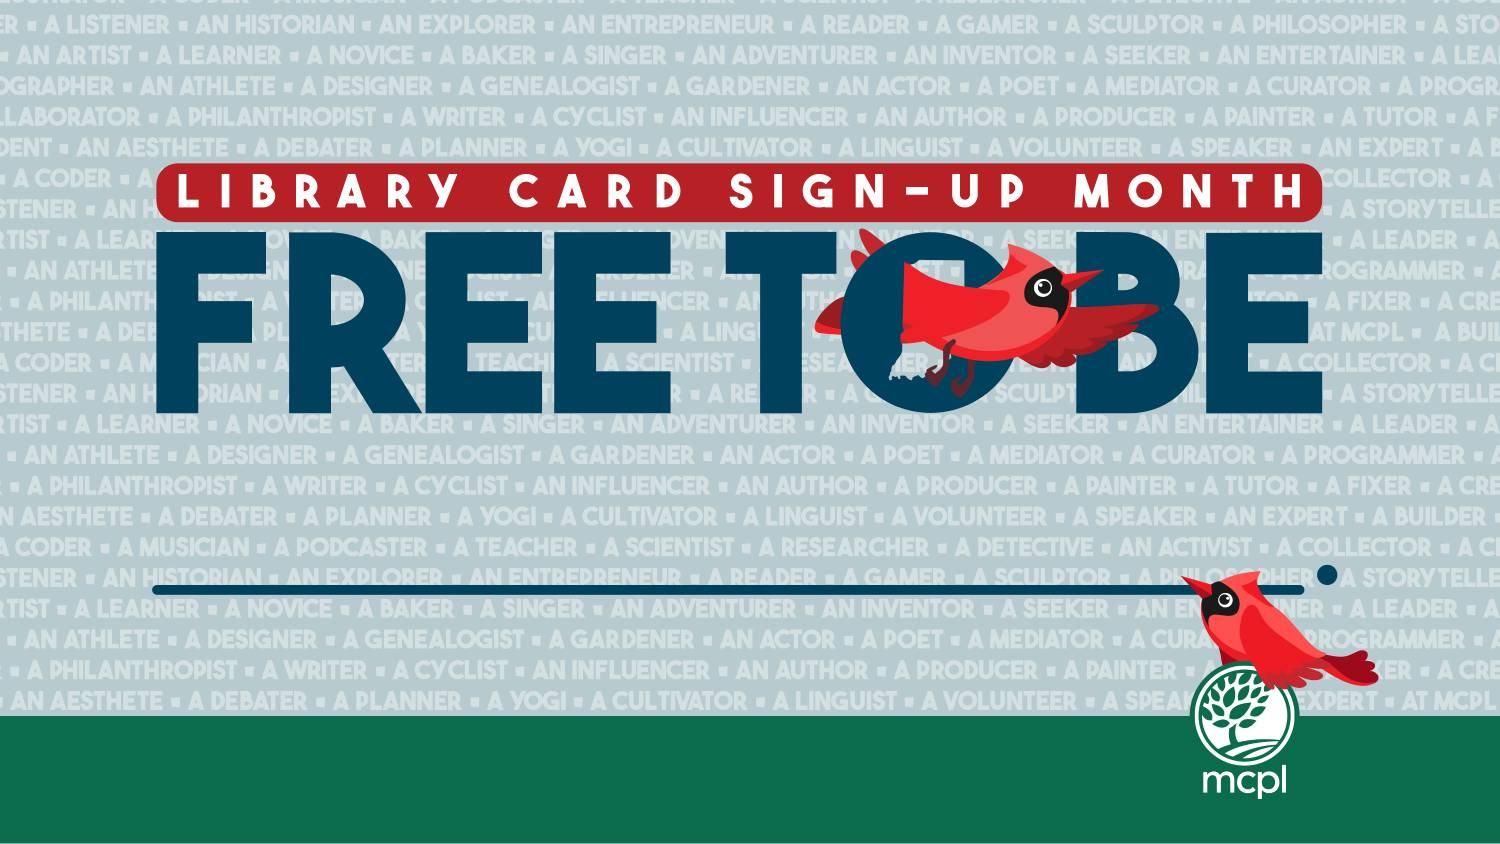 Library Card Sign-Up Month: Free to Be